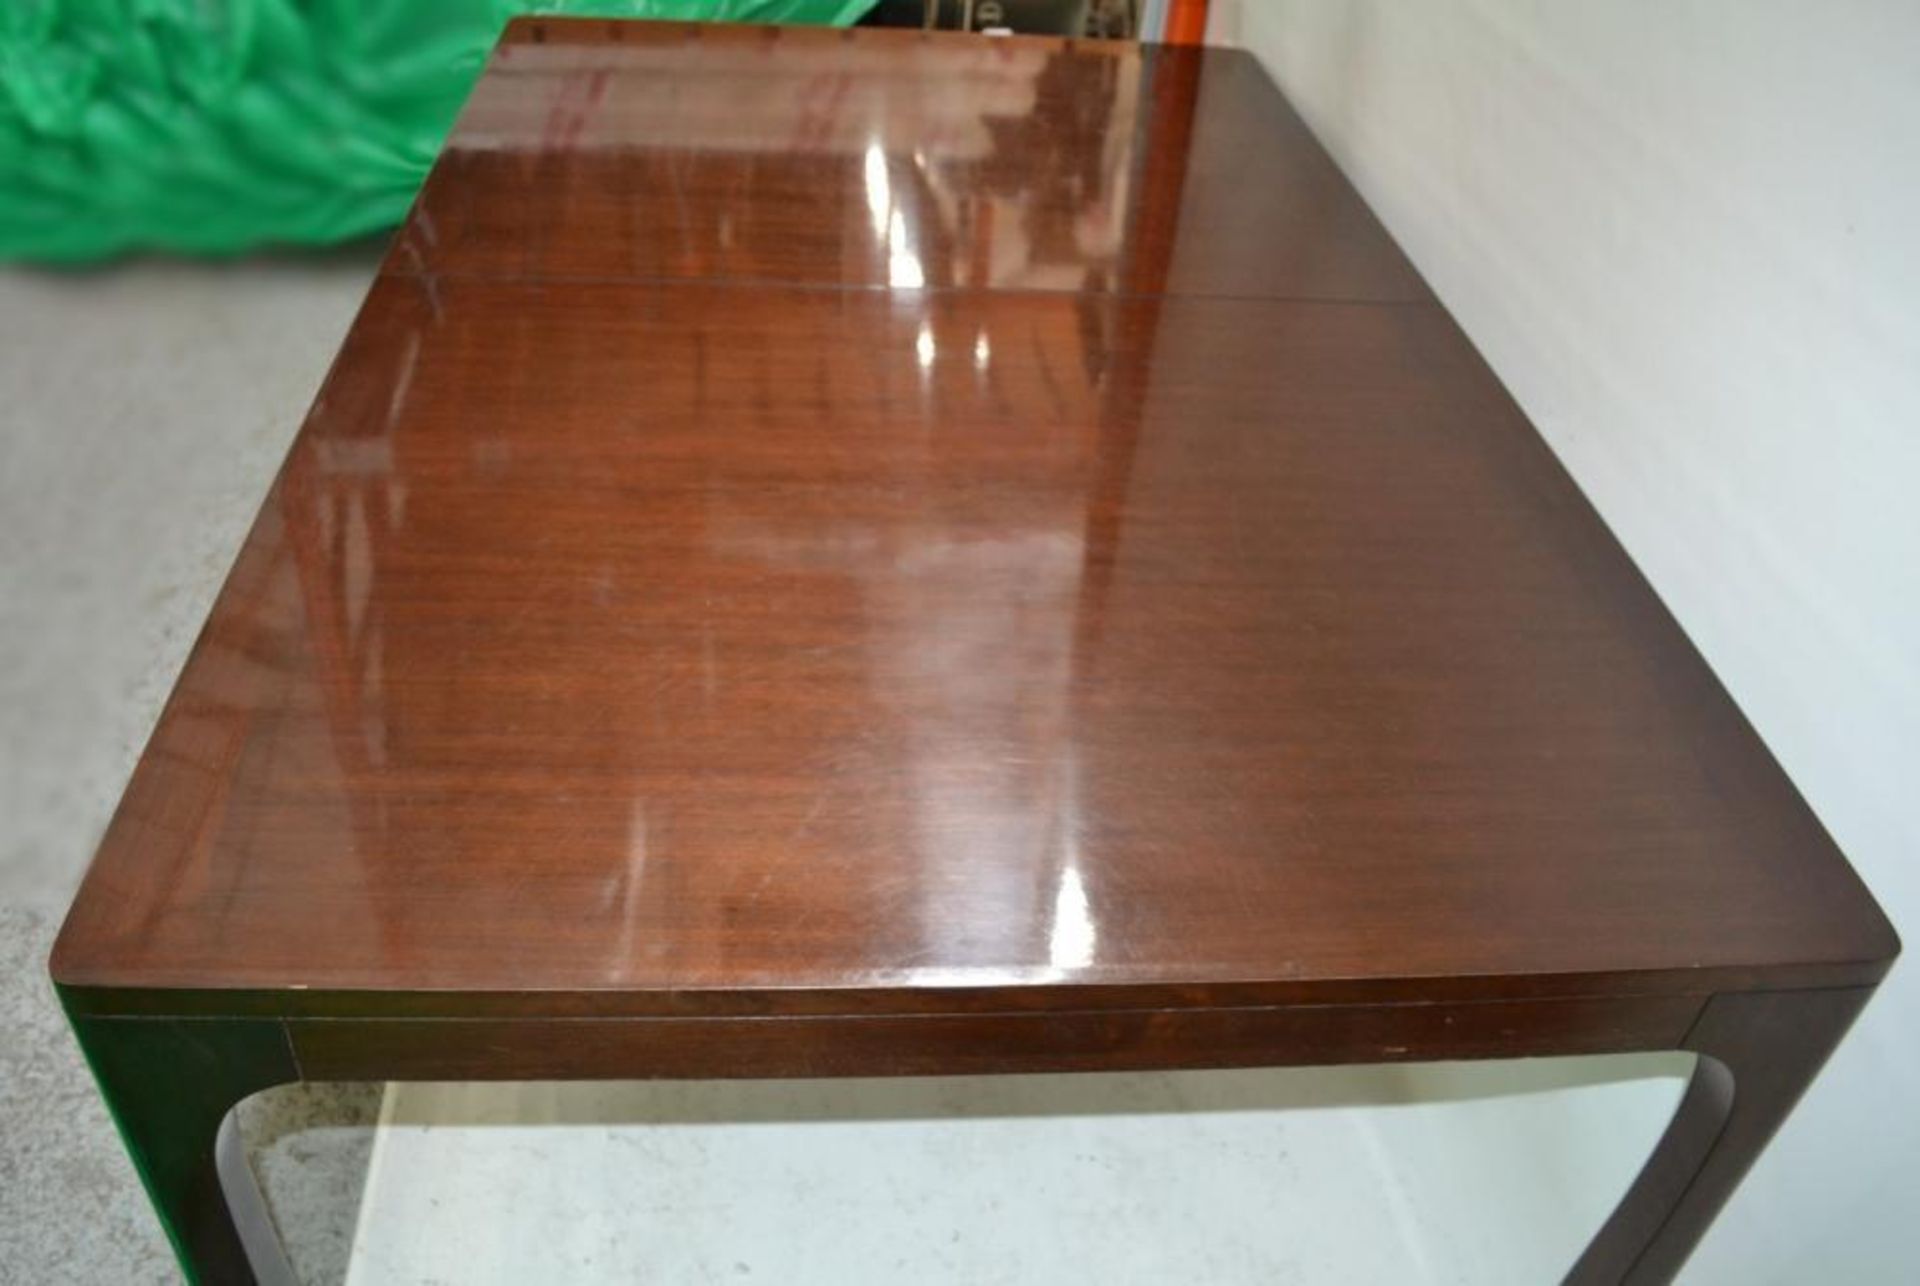 1 x BARBARA BARRY "Perfect Parsons" Dining Table In Dark Walnut - Includes Extensions Leaves - 2.8 M - Image 7 of 17